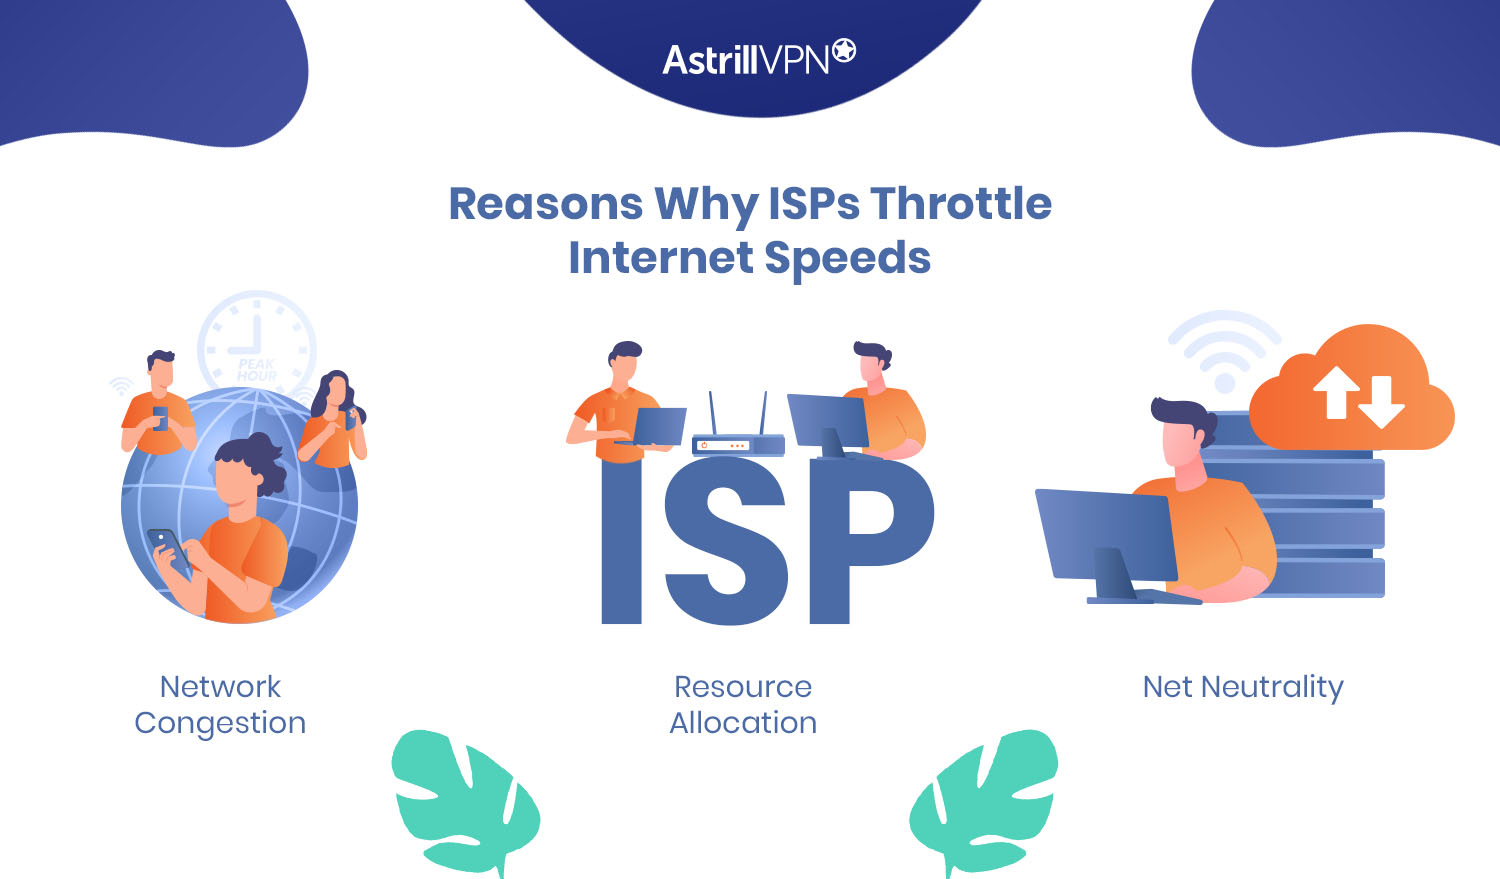 Reasons Why ISPs Throttle Internet Speeds